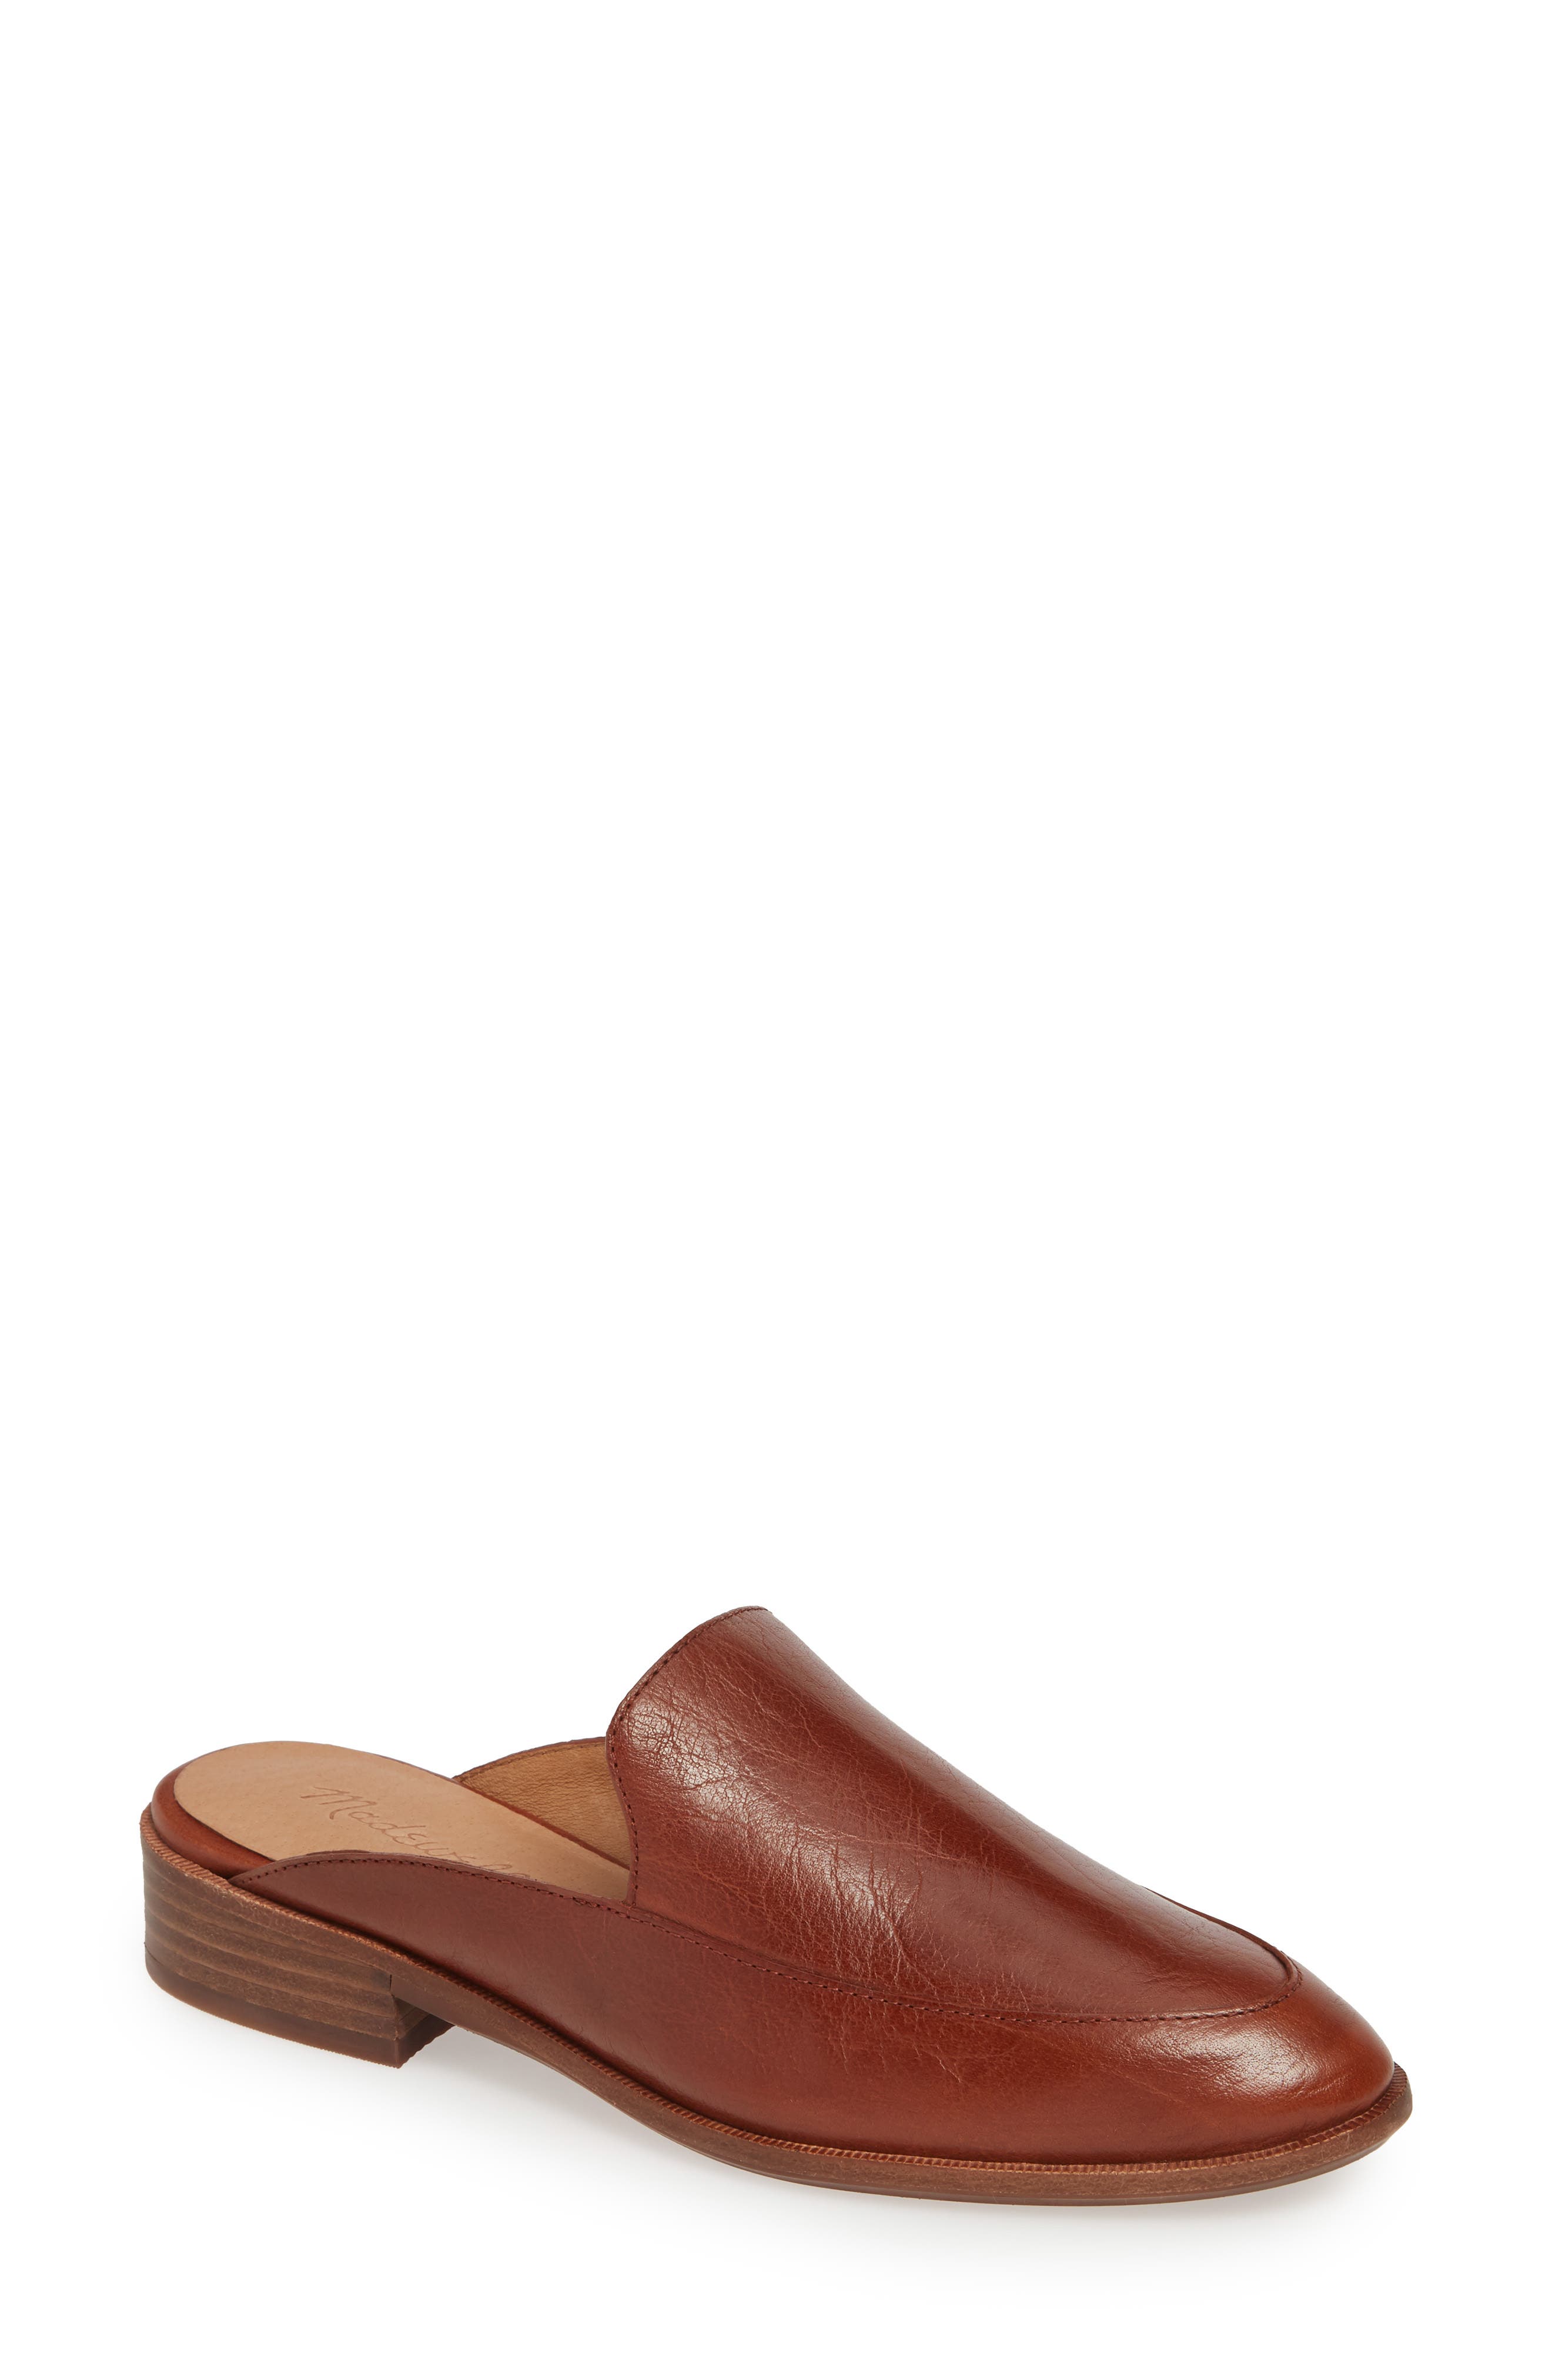 madewell nordstrom shoes